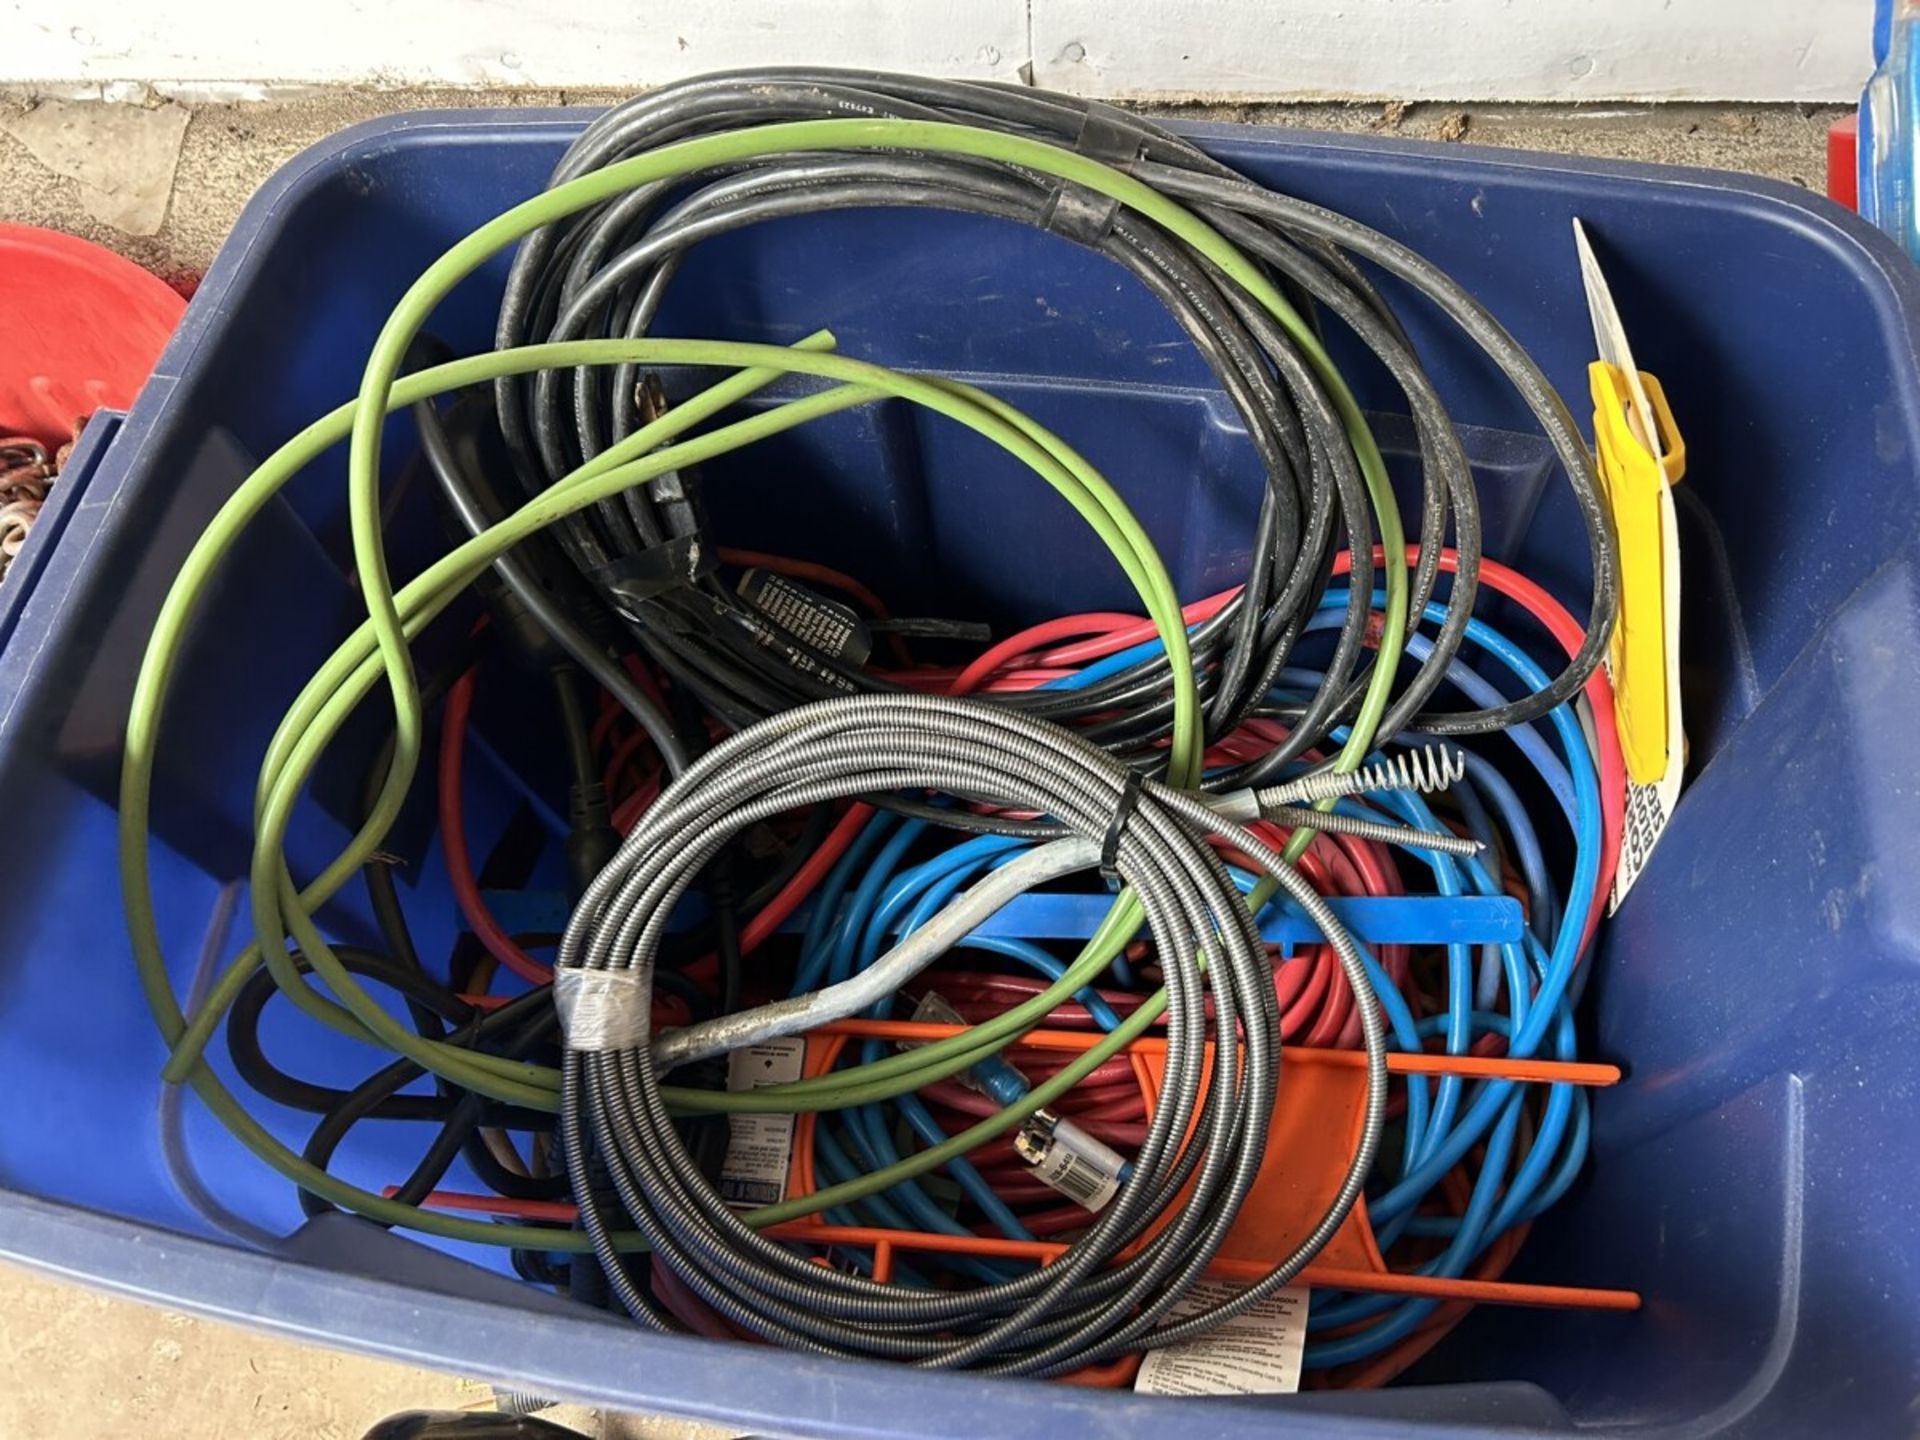 L/O ASSORTED POWER CORDS, CABLES, SEWER SNAKE, ETC. - Image 3 of 3